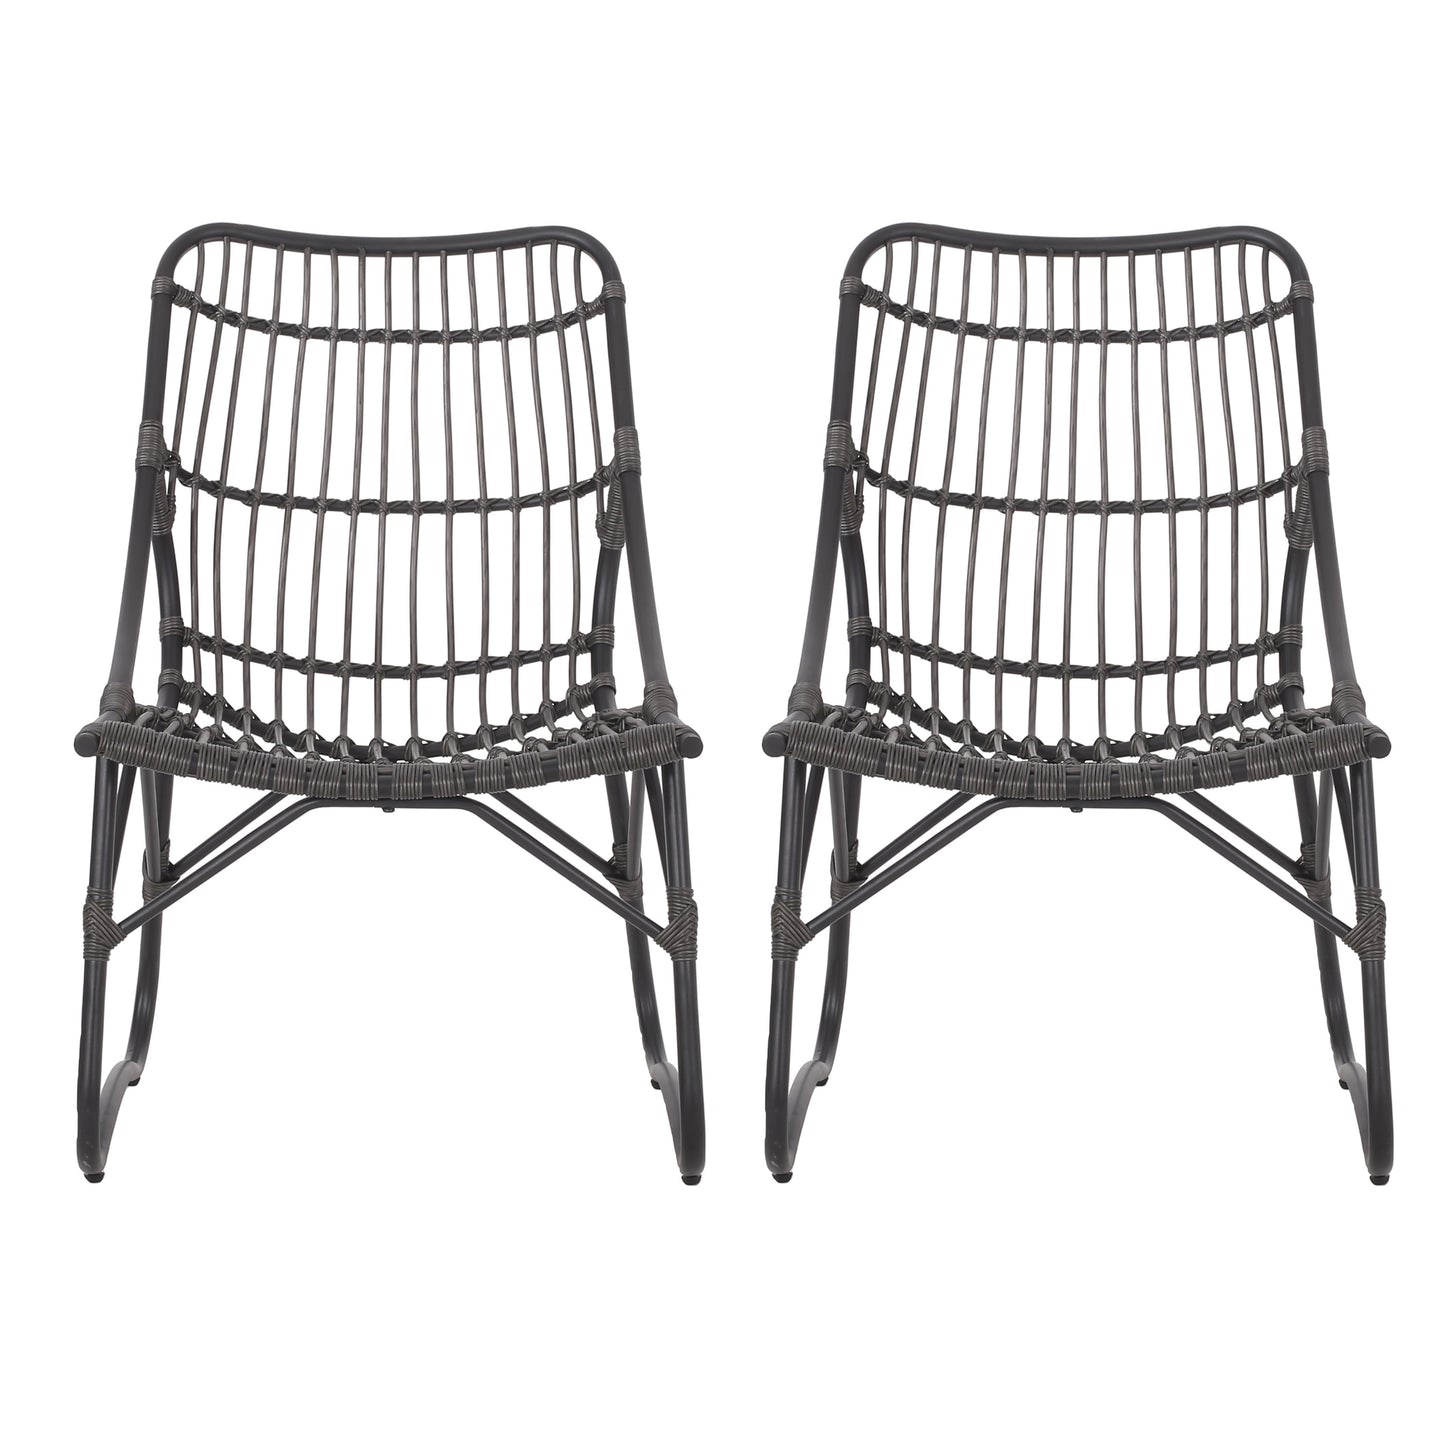 Benfield Outdoor Wicker Accent Chairs, Set of 2